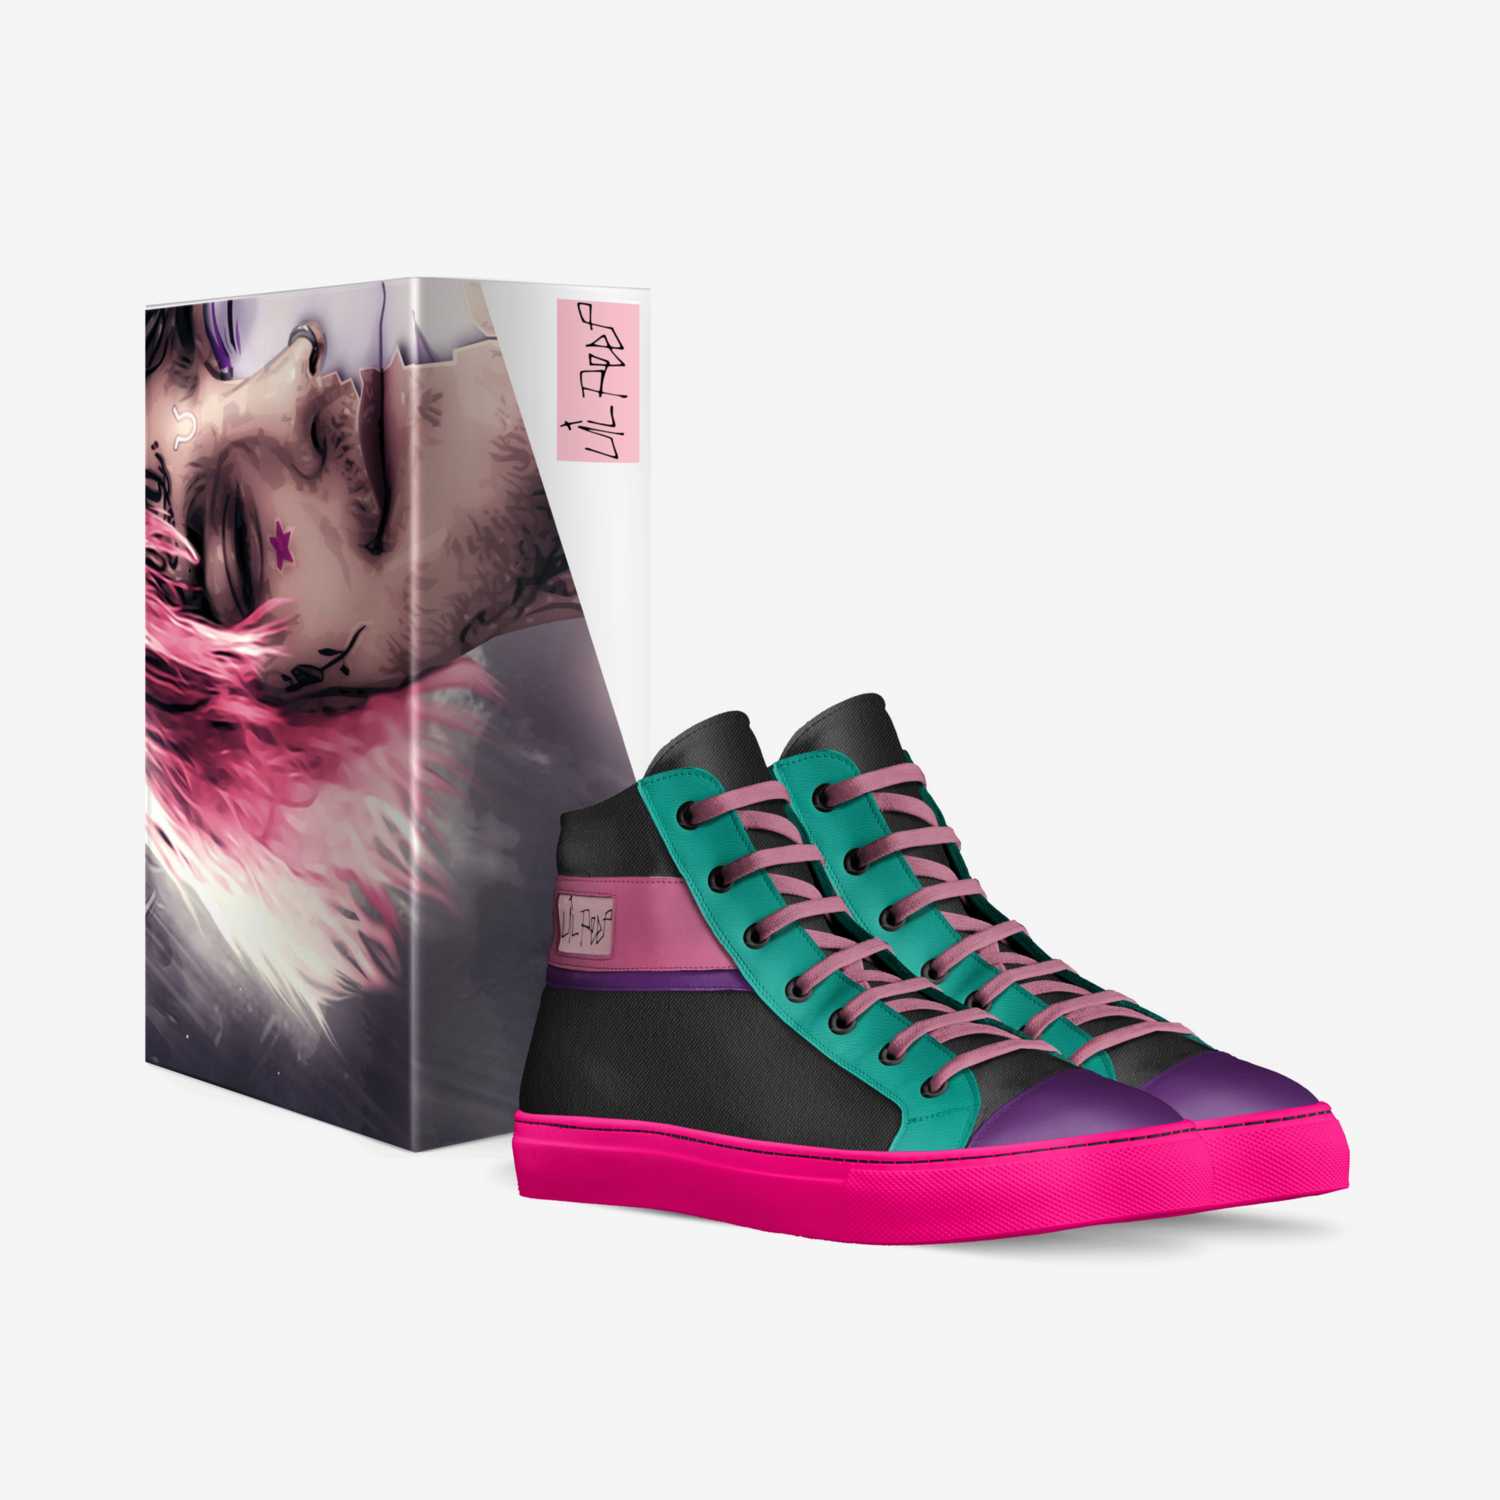 Cry baby custom made in Italy shoes by Michael Simon | Box view